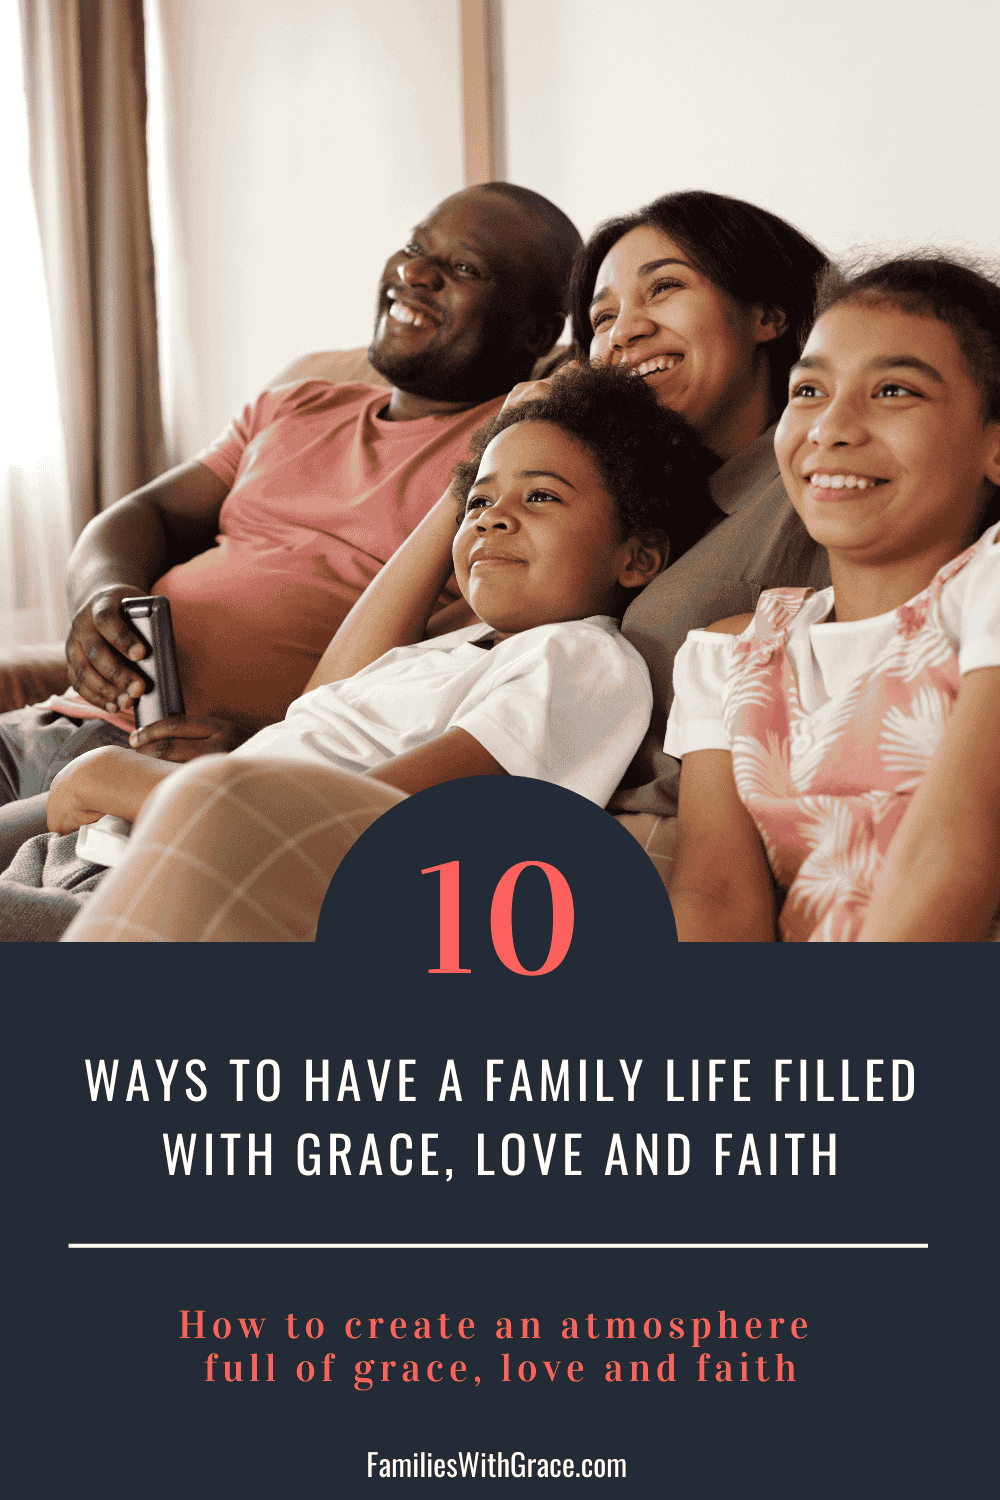 10 Ways to have a family life filled with grace, love and faith